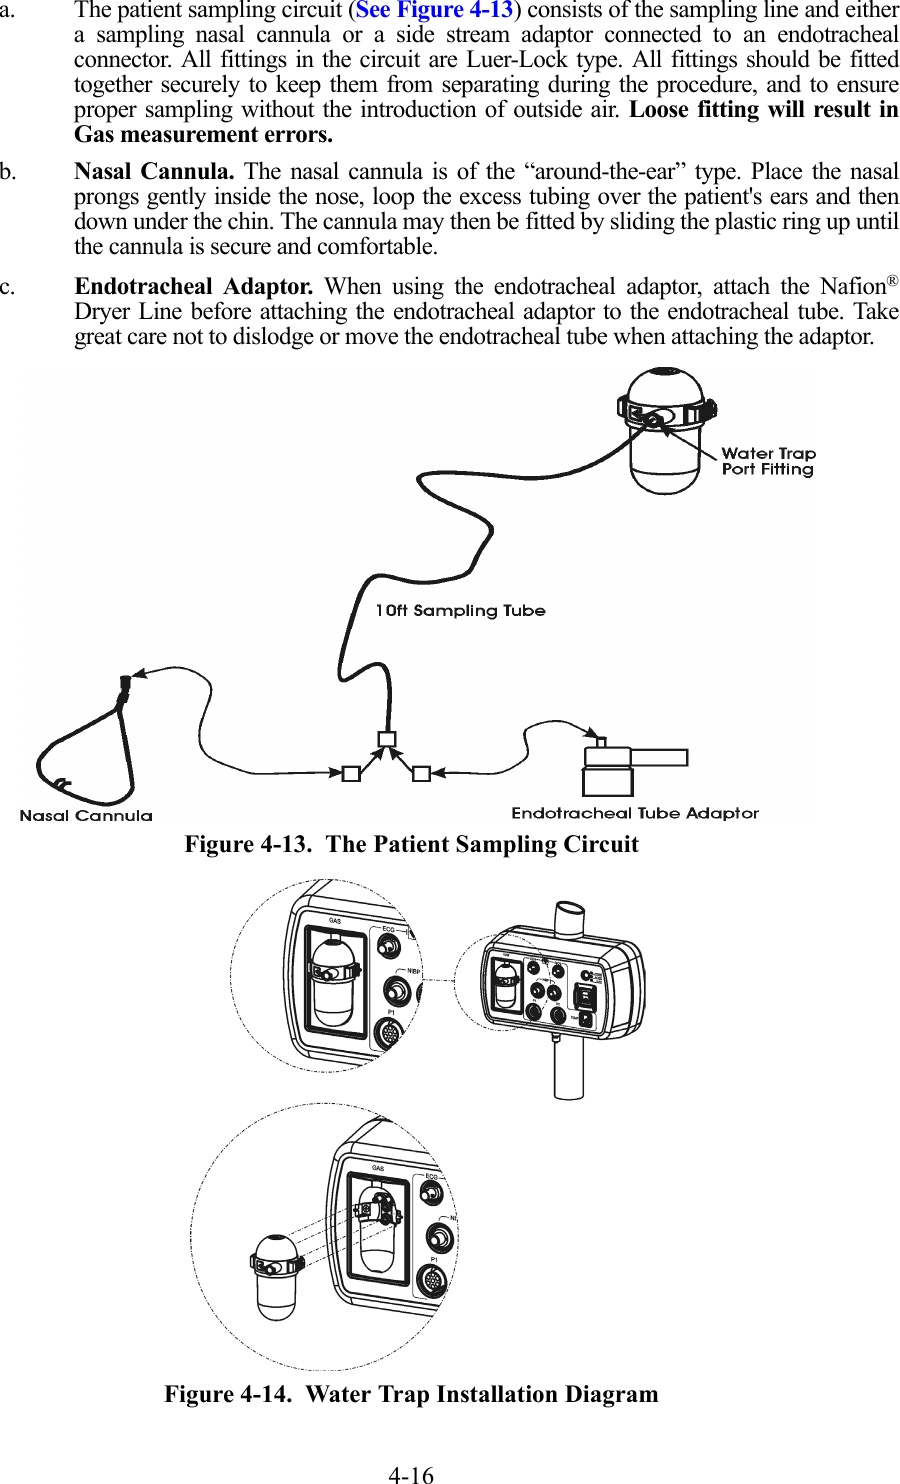 4-16a. The patient sampling circuit (See Figure 4-13) consists of the sampling line and eithera sampling nasal cannula or a side stream adaptor connected to an endotrachealconnector. All fittings in the circuit are Luer-Lock type. All fittings should be fittedtogether securely to keep them from separating during the procedure, and to ensureproper sampling without the introduction of outside air. Loose fitting will result inGas measurement errors.b. Nasal Cannula. The nasal cannula is of the “around-the-ear” type. Place the nasalprongs gently inside the nose, loop the excess tubing over the patient&apos;s ears and thendown under the chin. The cannula may then be fitted by sliding the plastic ring up untilthe cannula is secure and comfortable.c. Endotracheal Adaptor. When using the endotracheal adaptor, attach the Nafion®Dryer Line before attaching the endotracheal adaptor to the endotracheal tube. Takegreat care not to dislodge or move the endotracheal tube when attaching the adaptor.  Figure 4-13.  The Patient Sampling Circuit  Figure 4-14.  Water Trap Installation Diagram